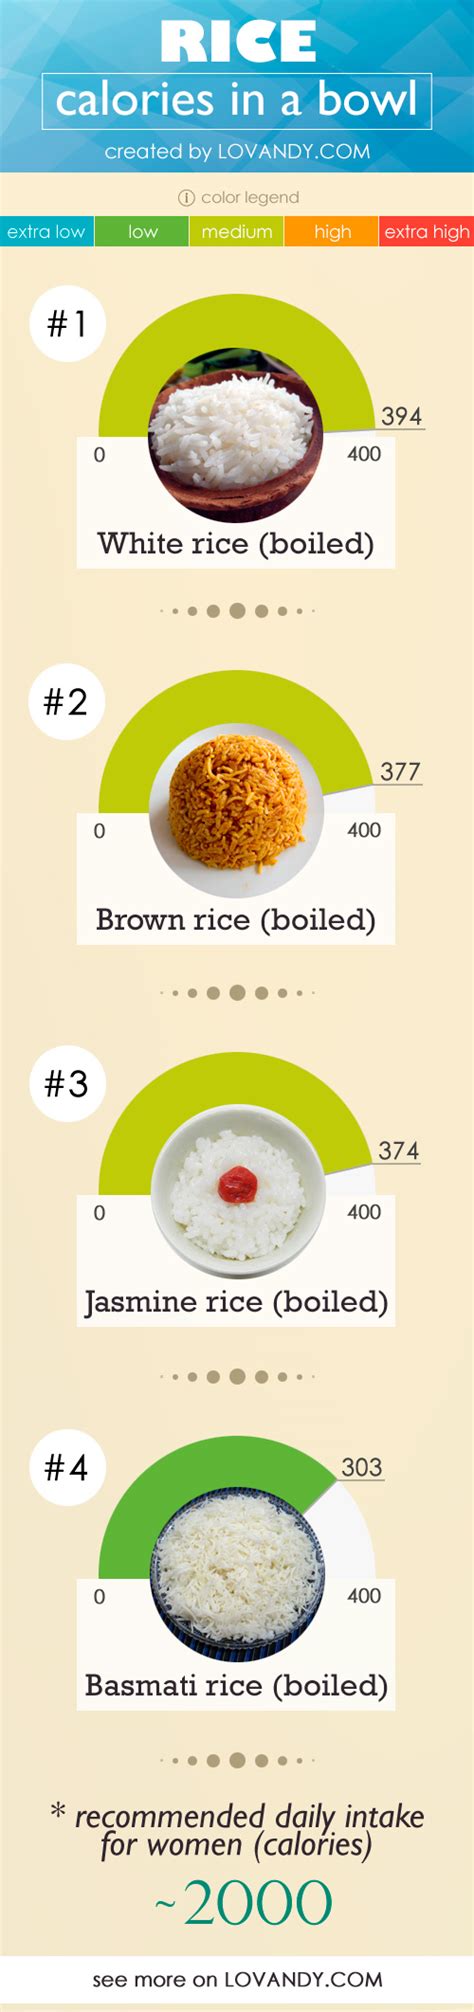 Calories in rice basmati. Jasmine rice has a glycemic index of 68 to 80, whereas basmati rice has a rating of 55 to 60. Basmati breaks down more slowly while delivering sugar to the bloodstream than jasmine. It has a much lower GI than other varieties of rice and is an ideal option for weight loss. 